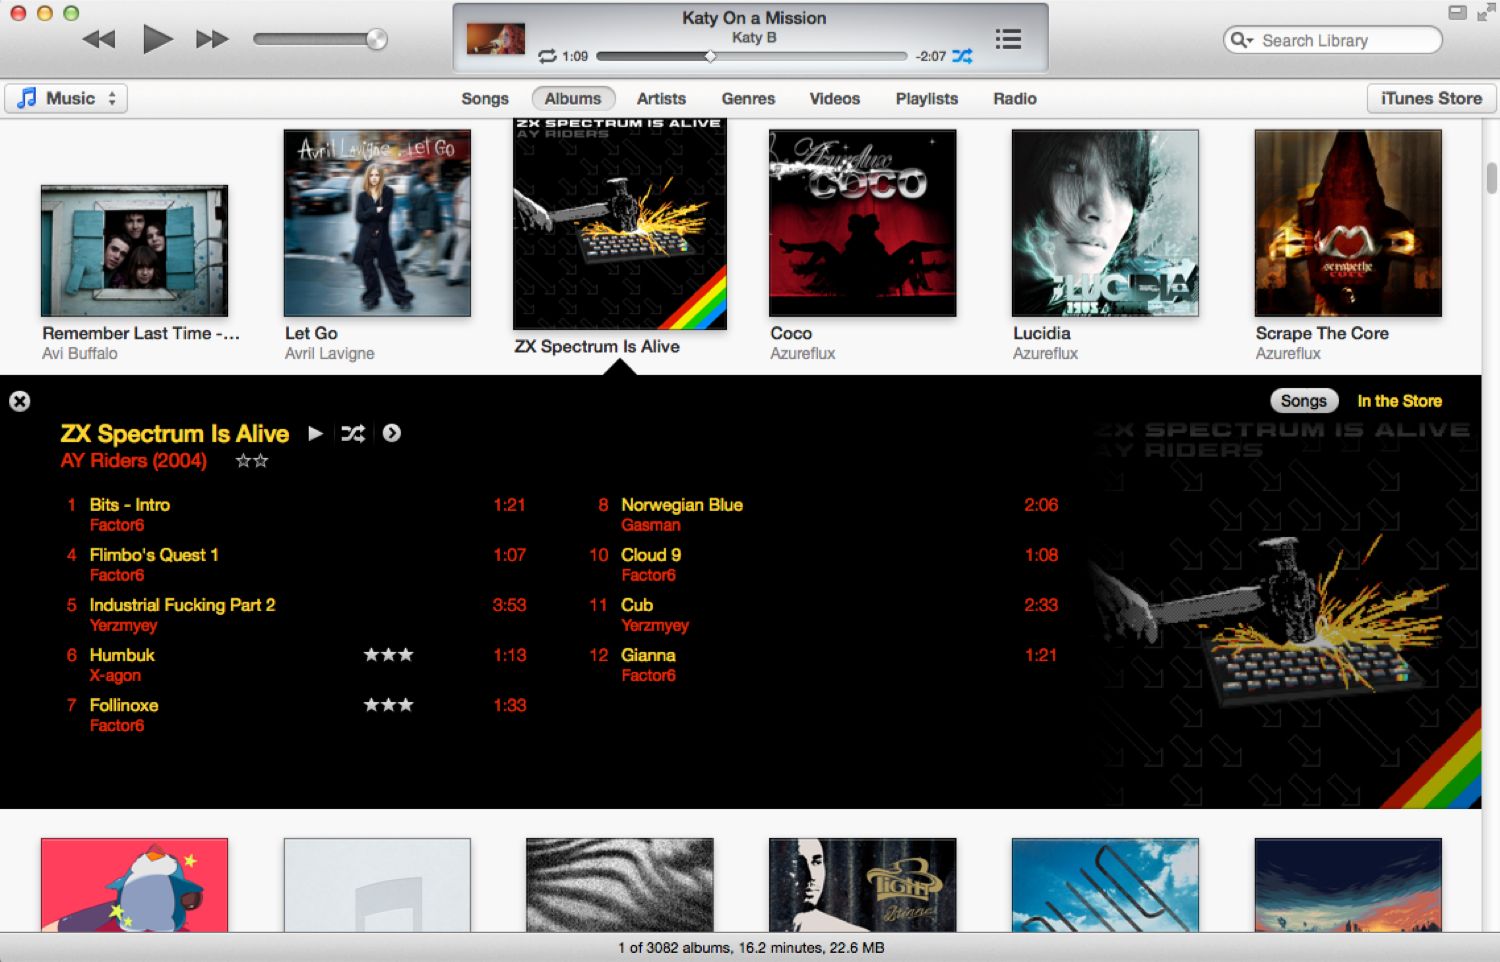 itunes for mac os x 10.5.8